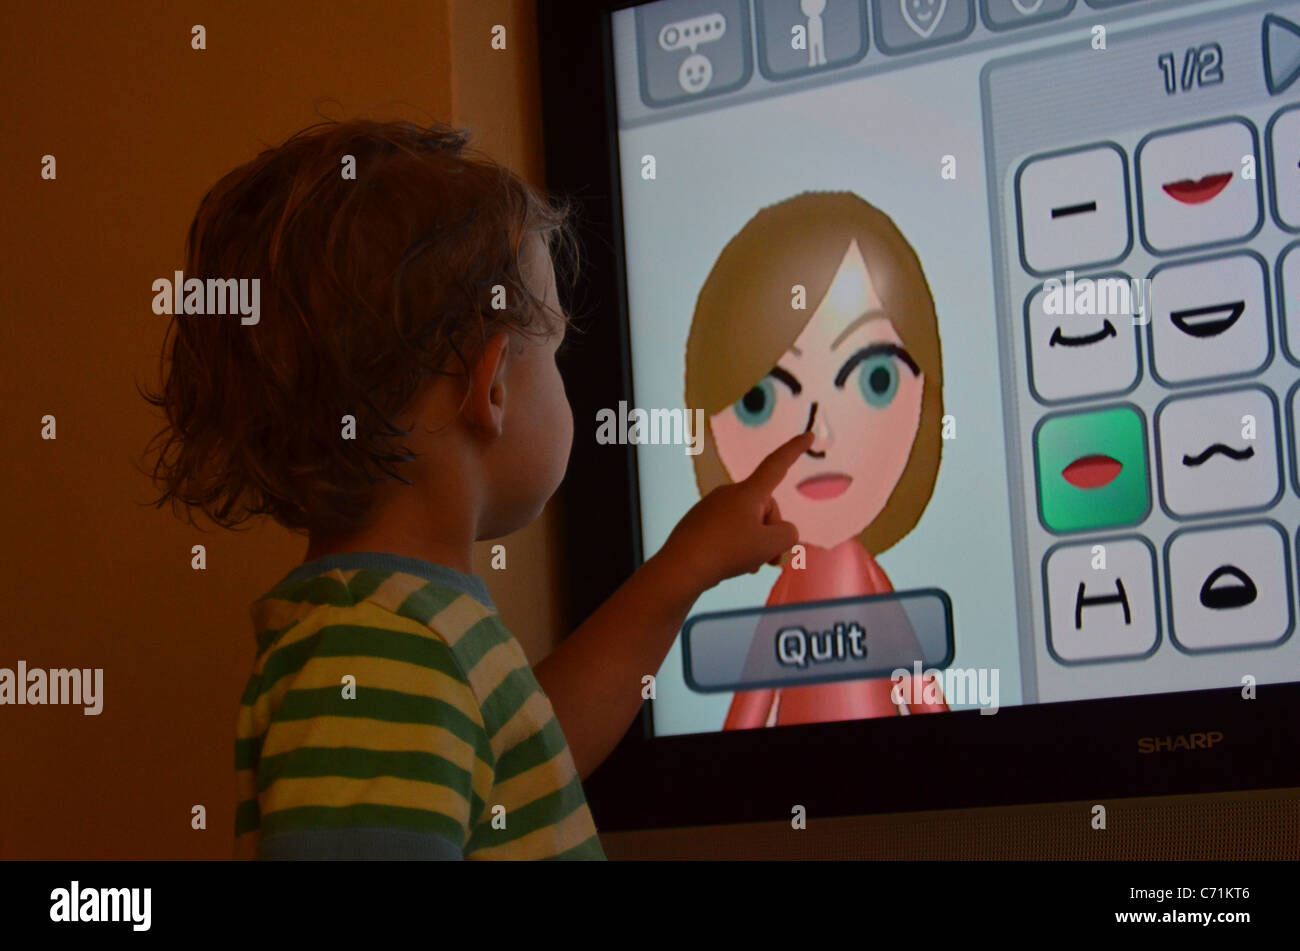 Small child points to character avatar in Nintendo Wii game Stock Photo -  Alamy